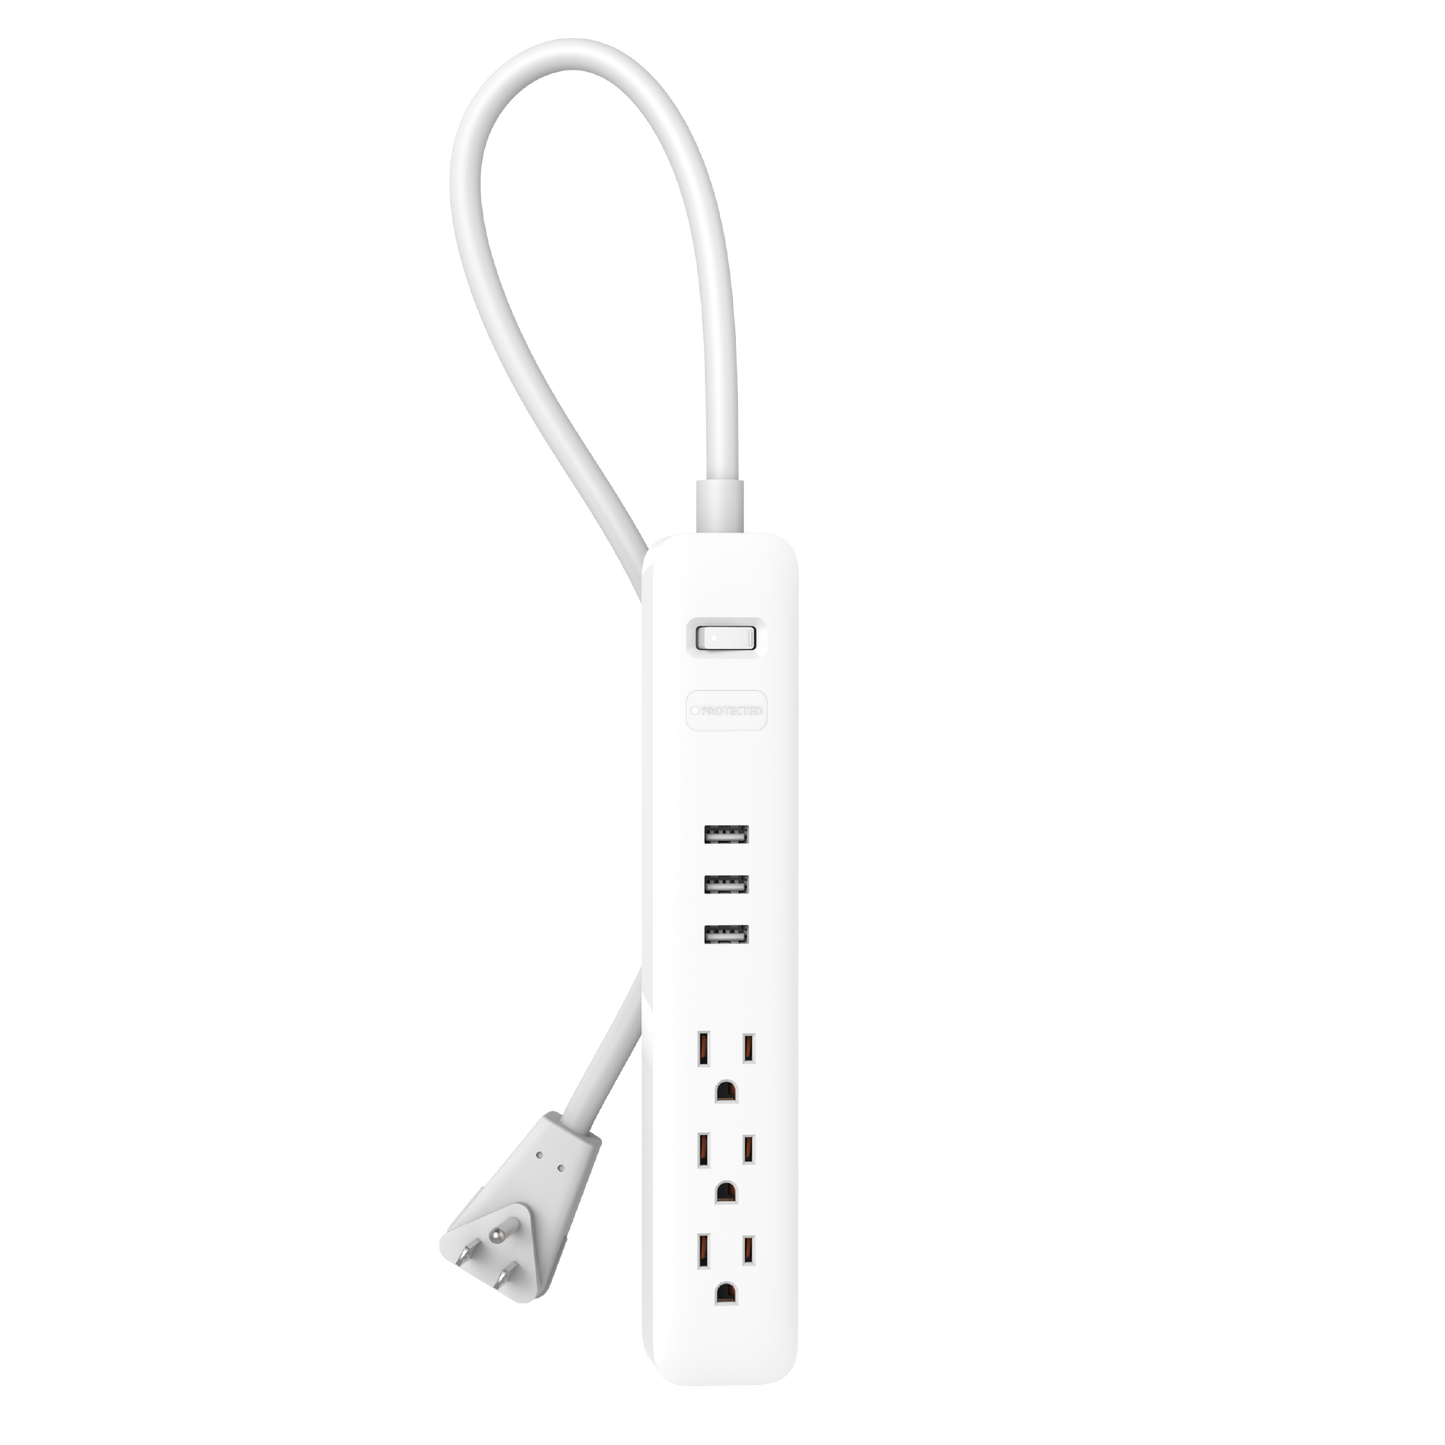 Wyze Surge Protector strip with the 3 prong plug shown against a transparent background.